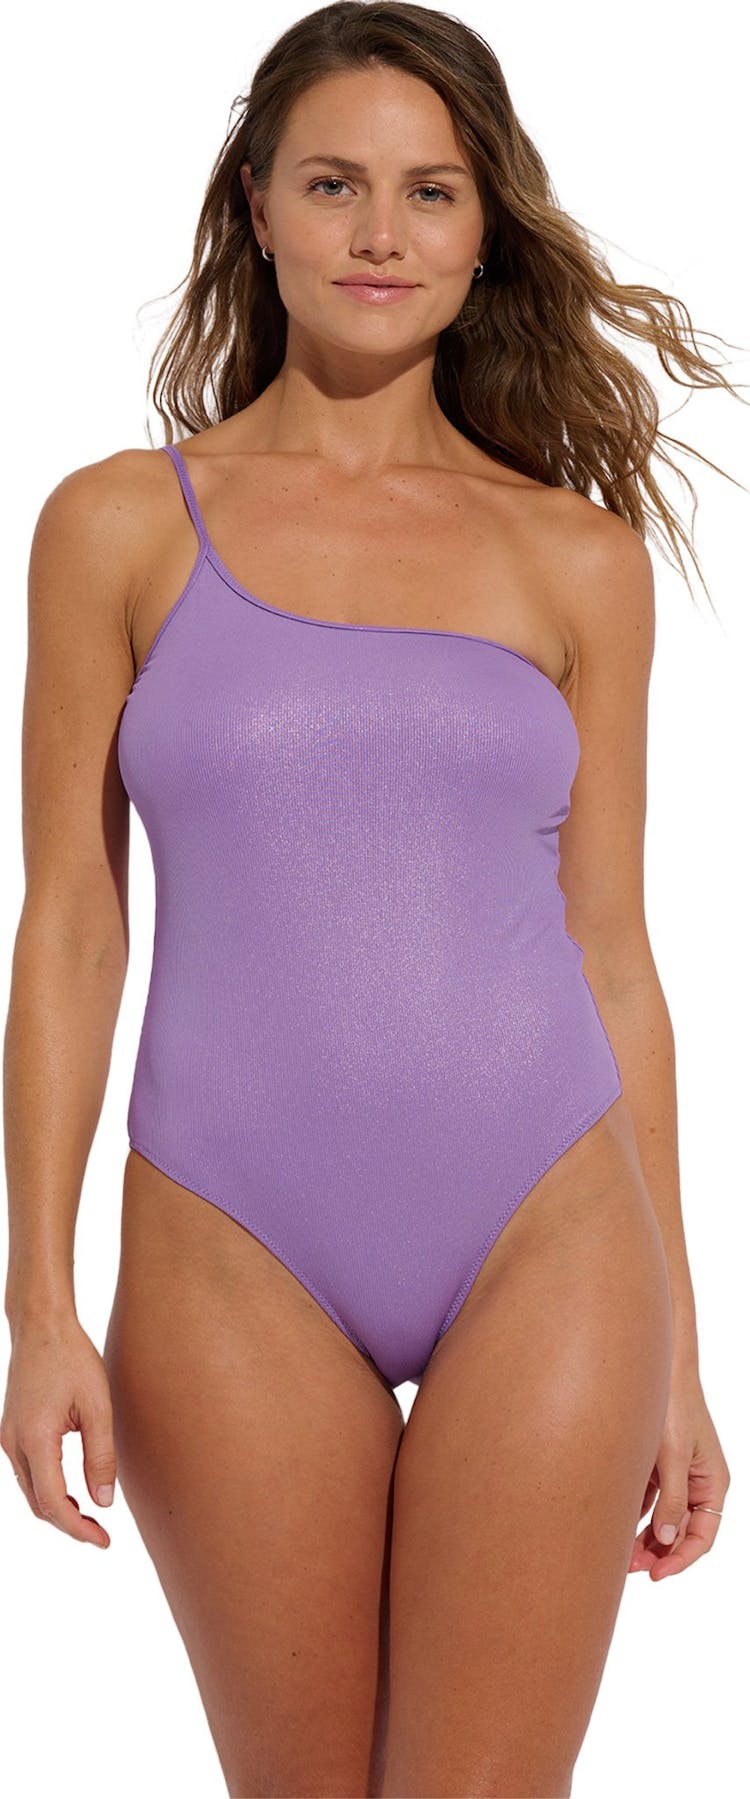 Everyday Sunday One Shoulder One-piece Swimsuit - Women's